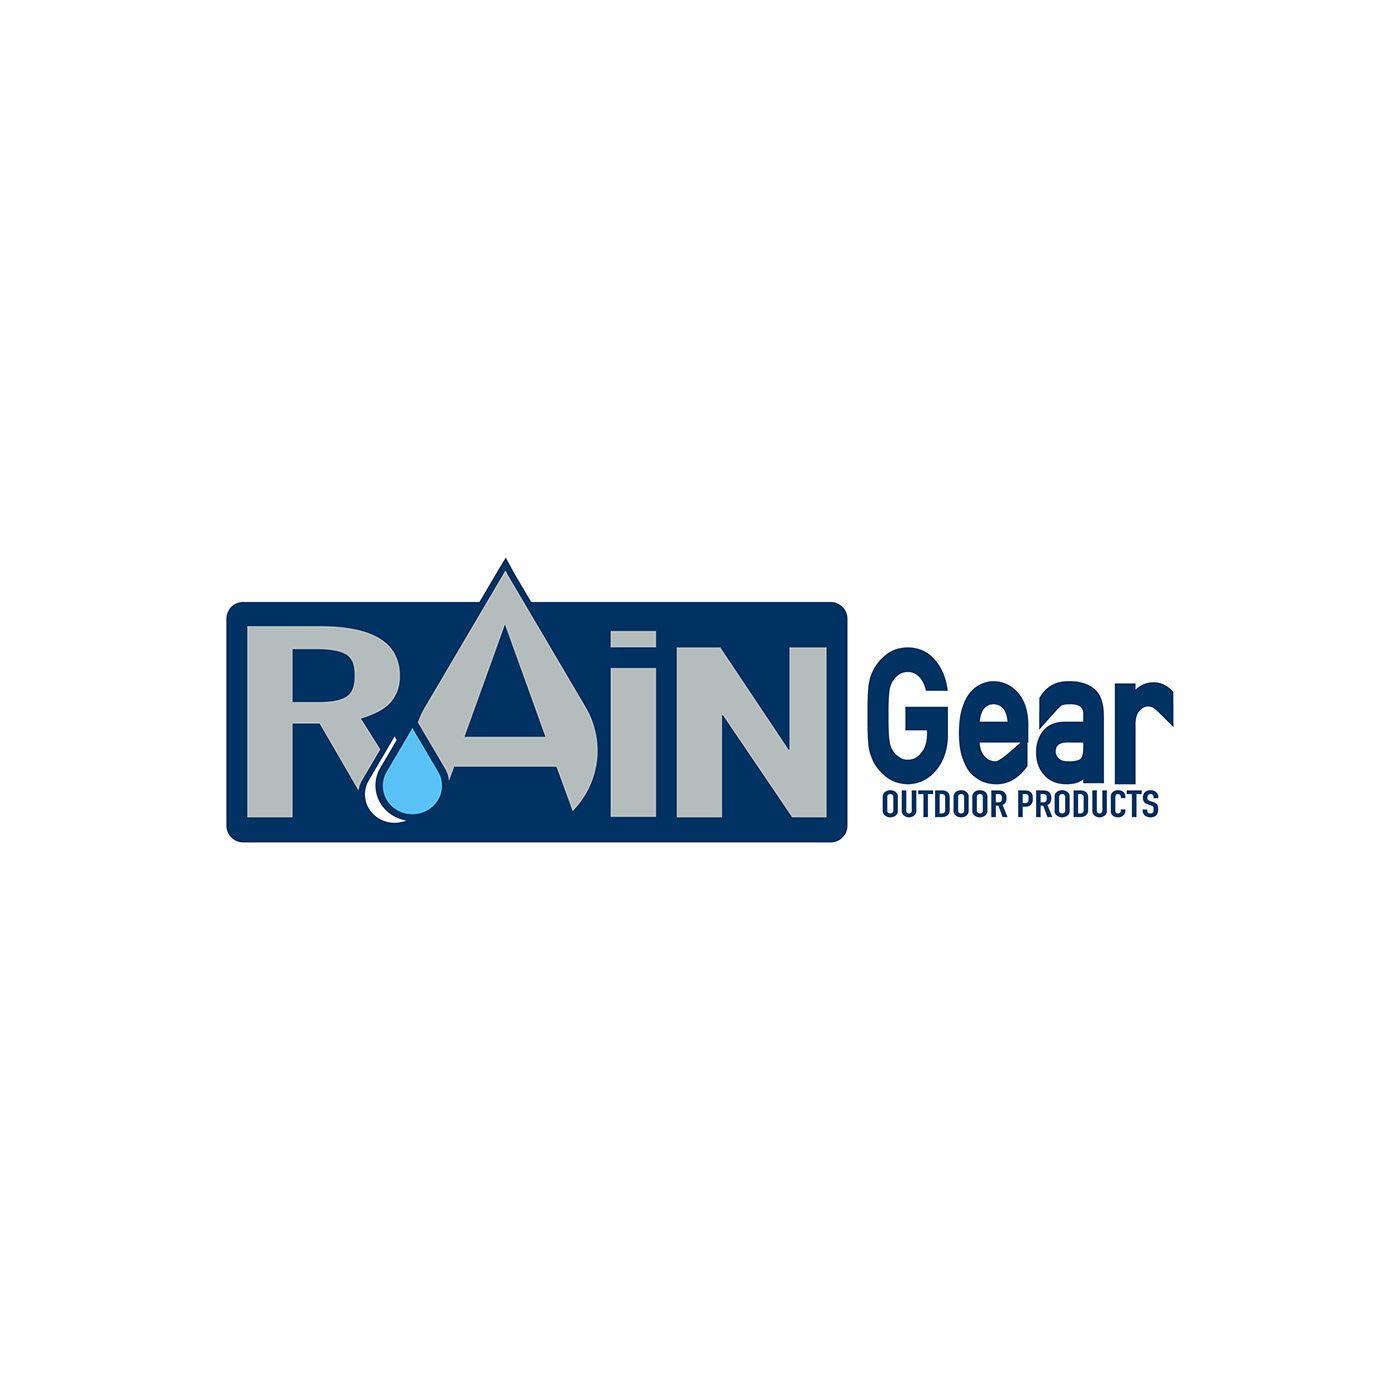 Outdoor Products Logo - RAIN GEAR Outdoor Products